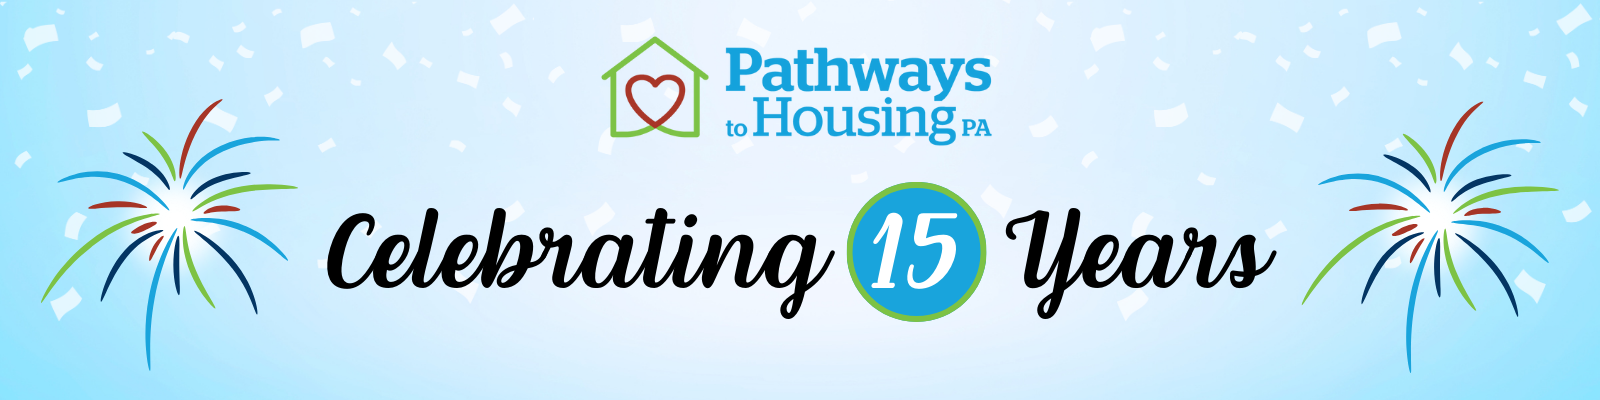 Celebrating 15 Years with Pathways logo and graphic fireworks